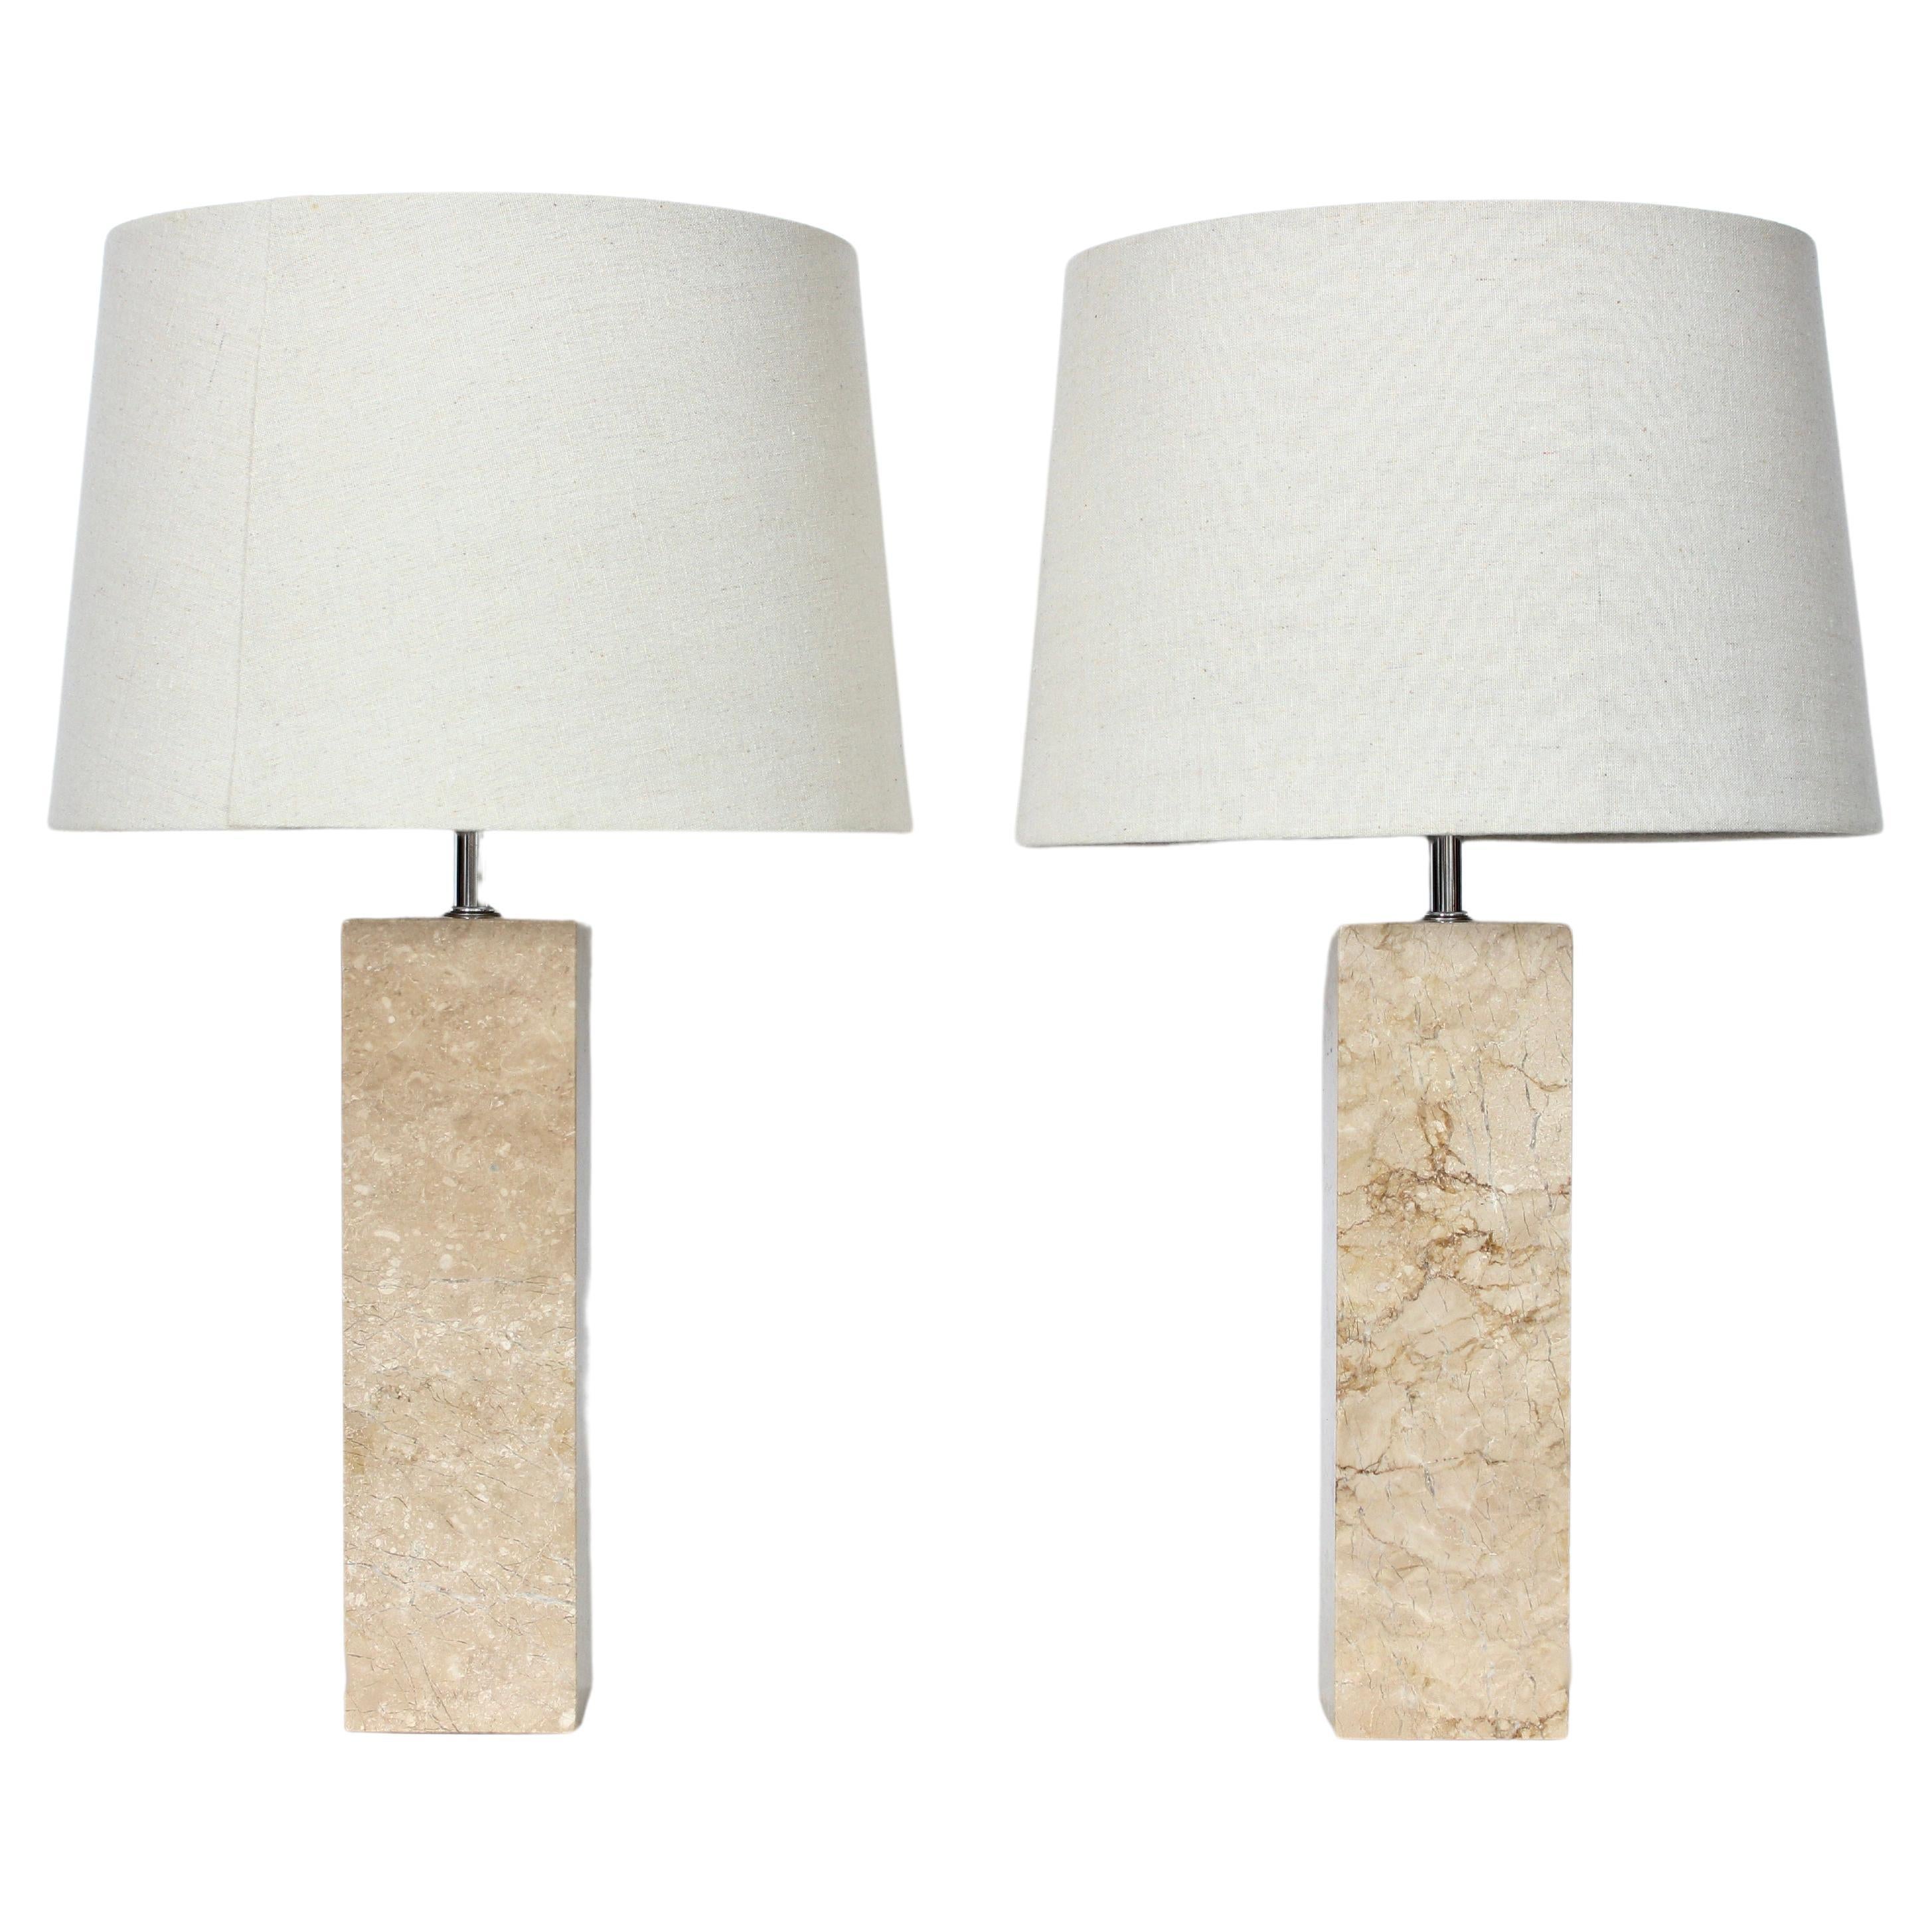 Pair of George Kovacs Tan Solid Travertine Table Lamps, 1970's For Sale